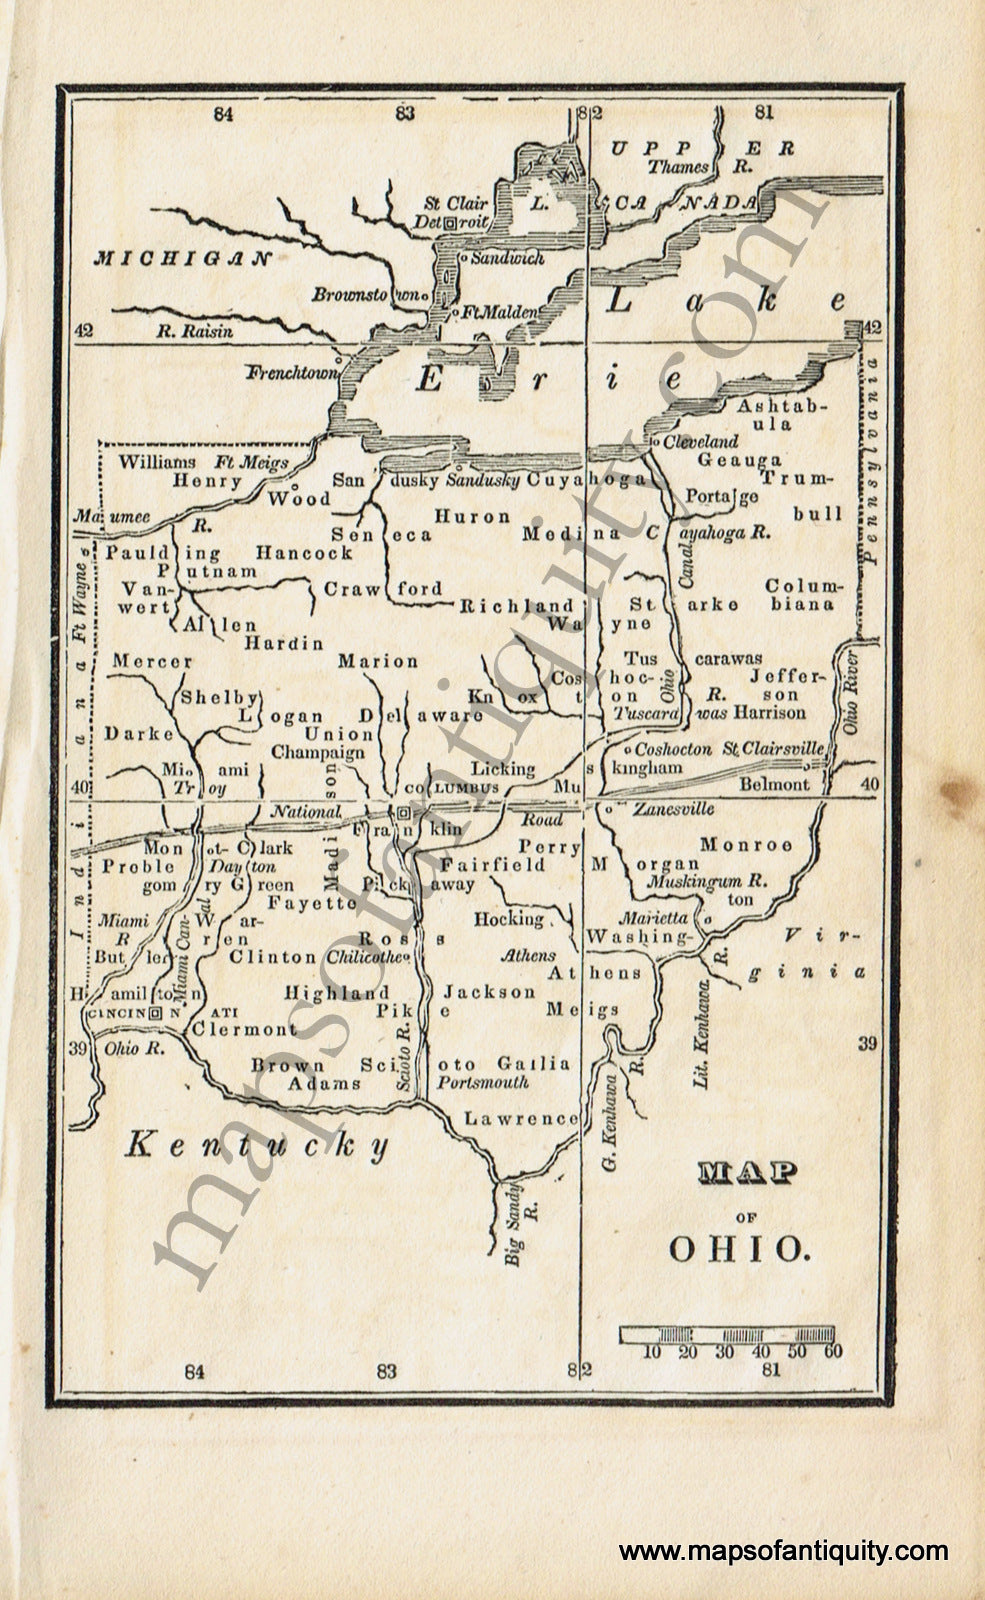 Antique-Black-and-White-Map-Map-of-Ohio-******-United-States-Midwest-1830-Boston-School-Geography-Maps-Of-Antiquity